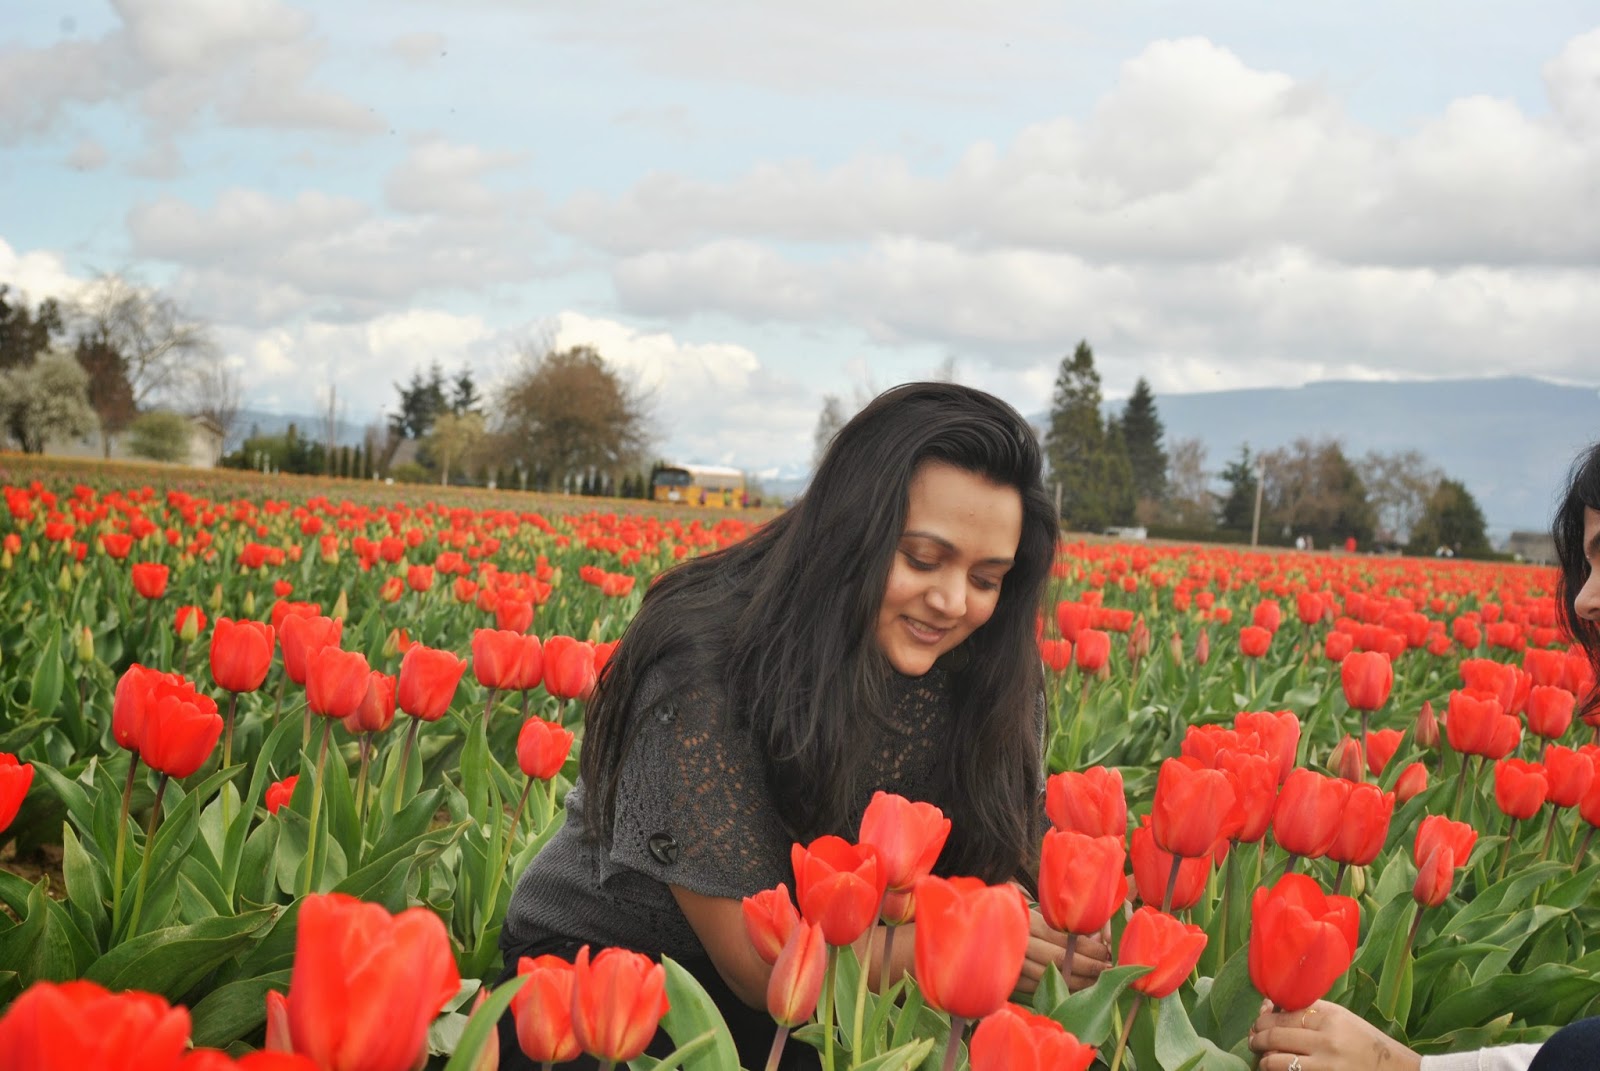 Tulip festival, tulip flowers, girl in a flower garden, Beautiful flowers and beautiful girl, Places to visit near Seattle, 